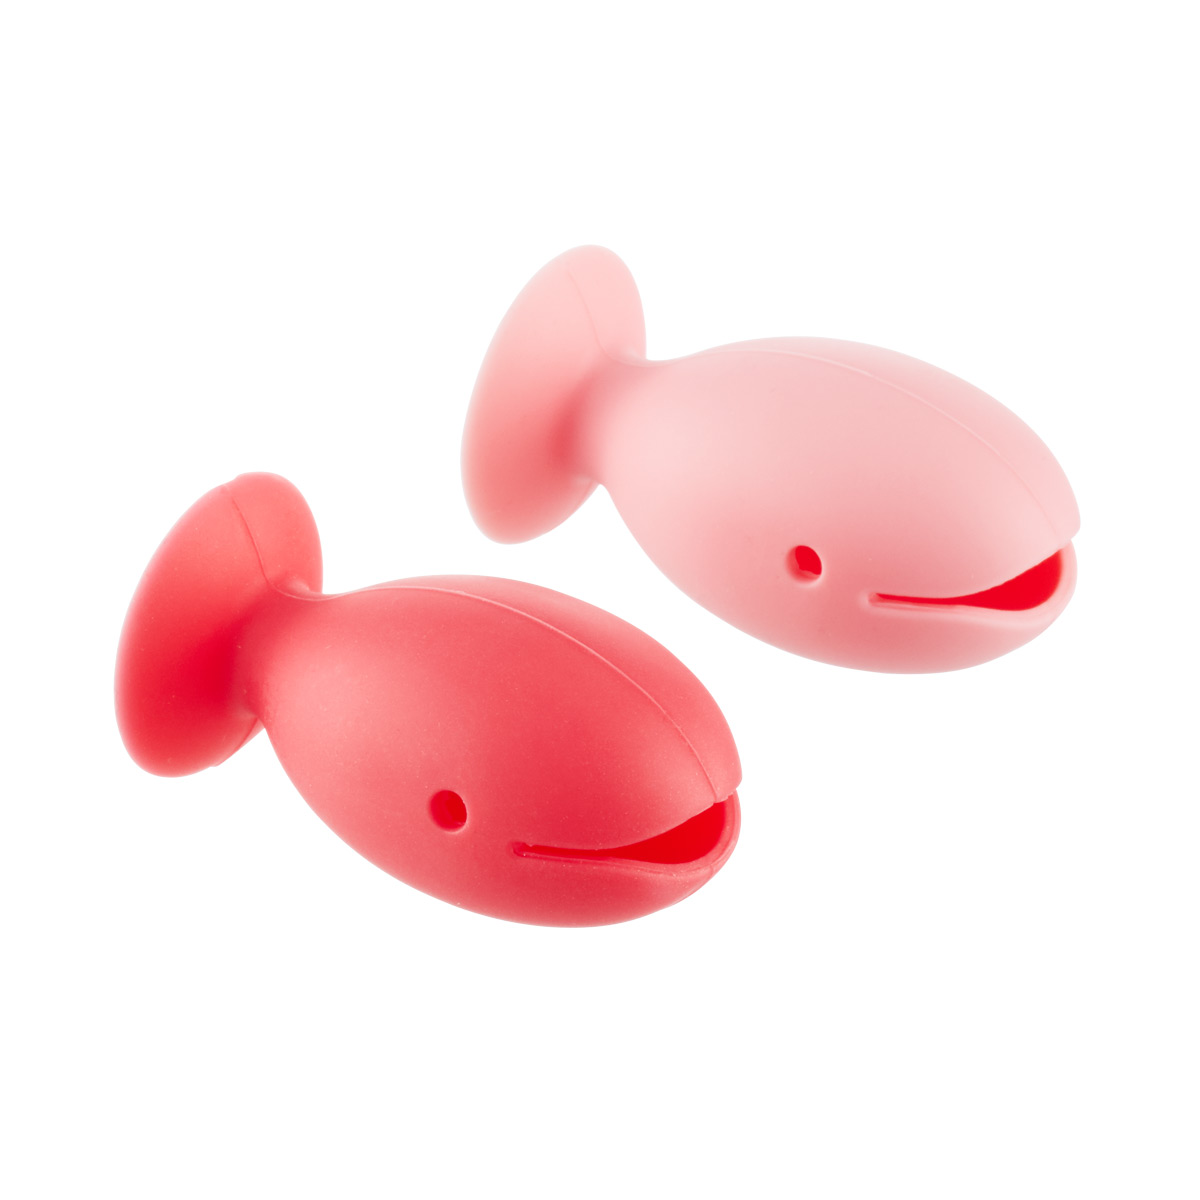 Fish Toothbrush Covers Pink Pkg/2